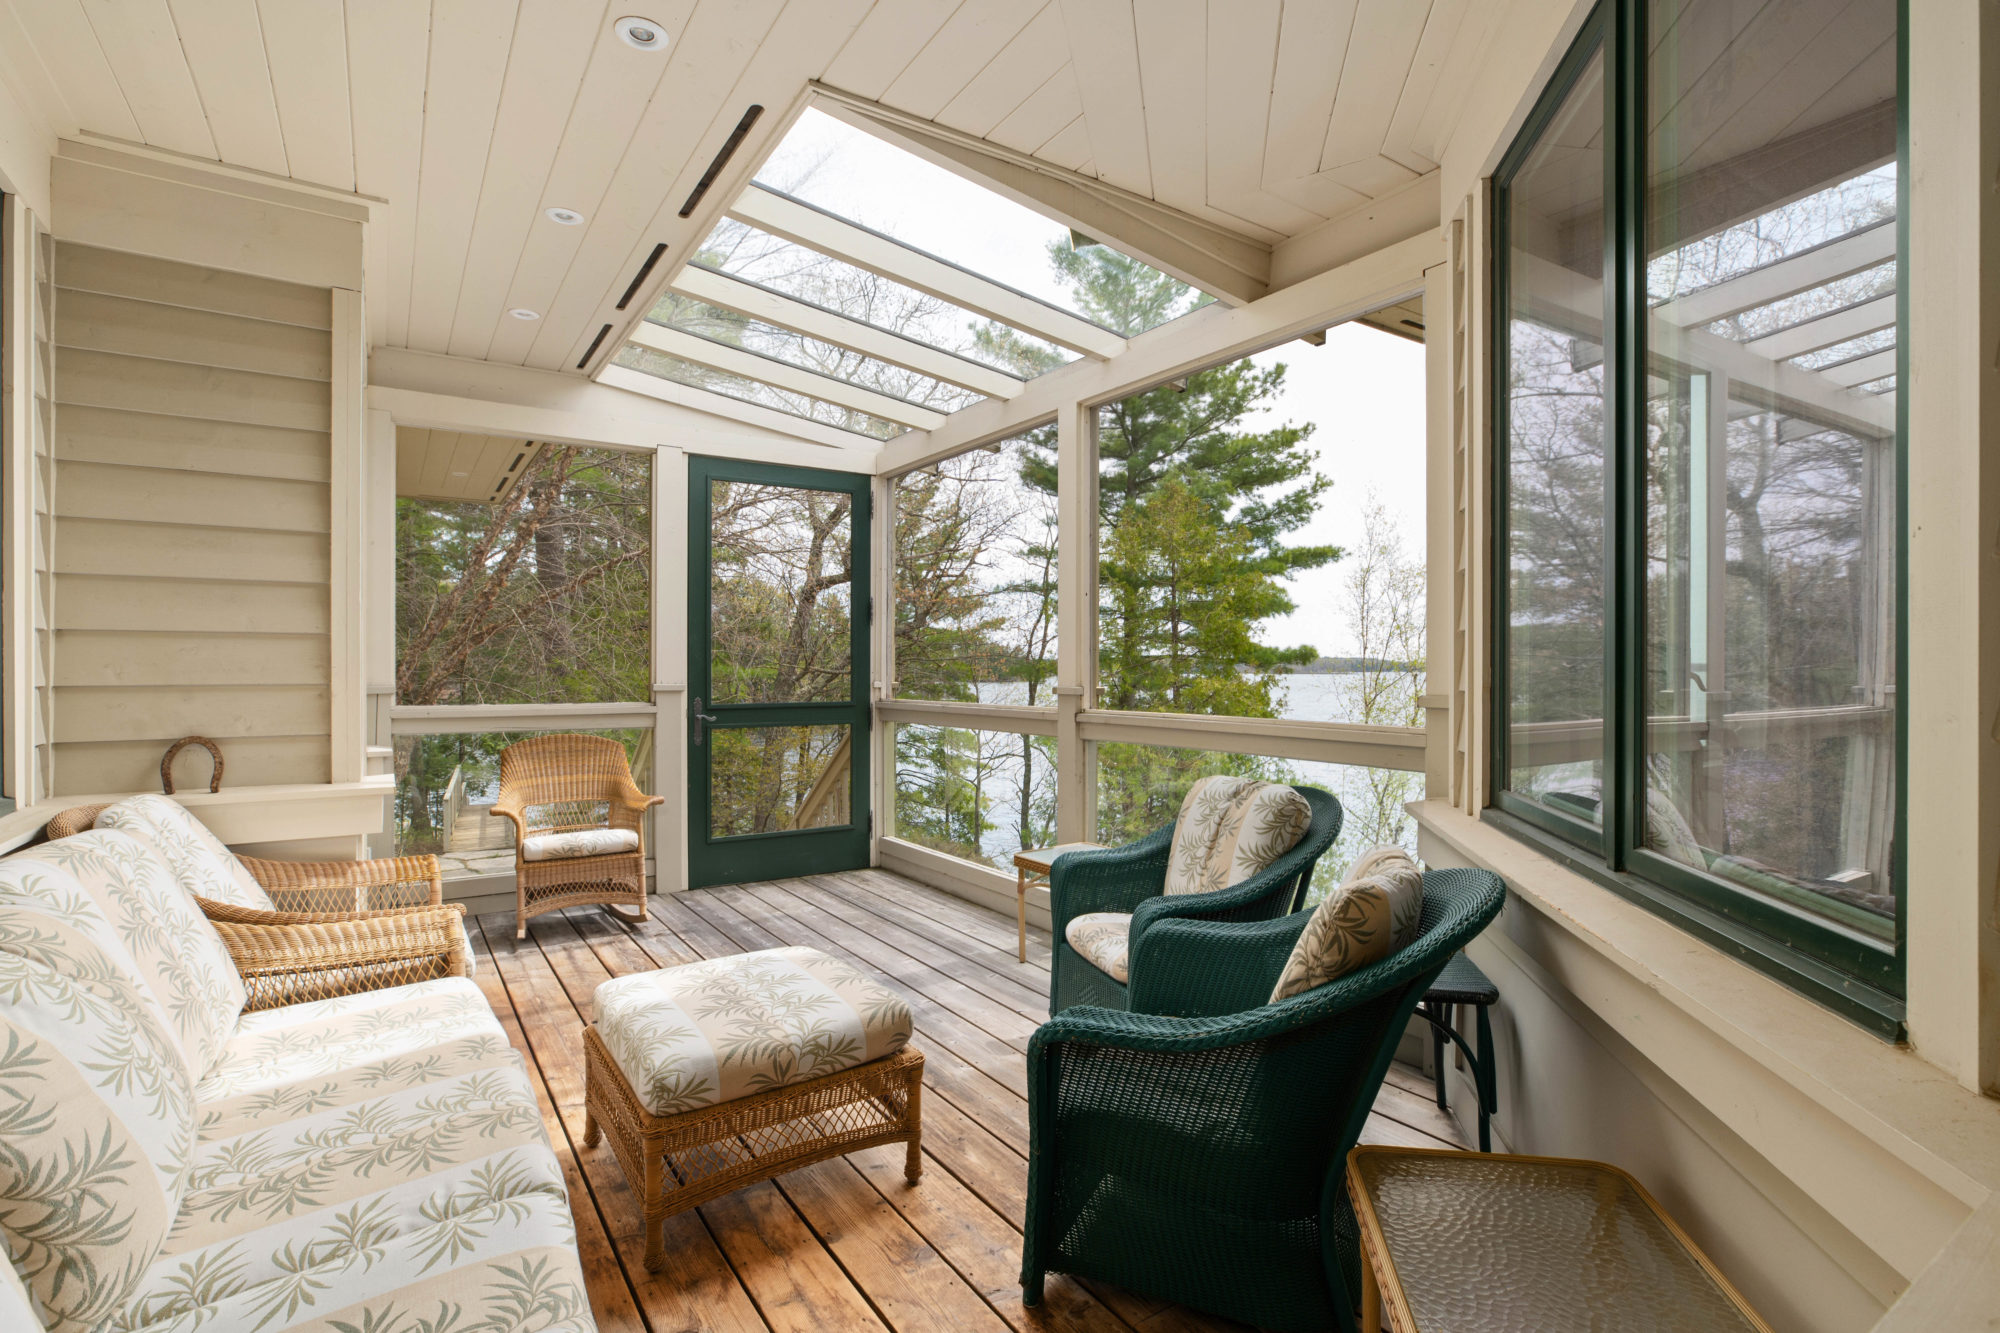 The screened-in porch is ideal for reading or a morning coffee.